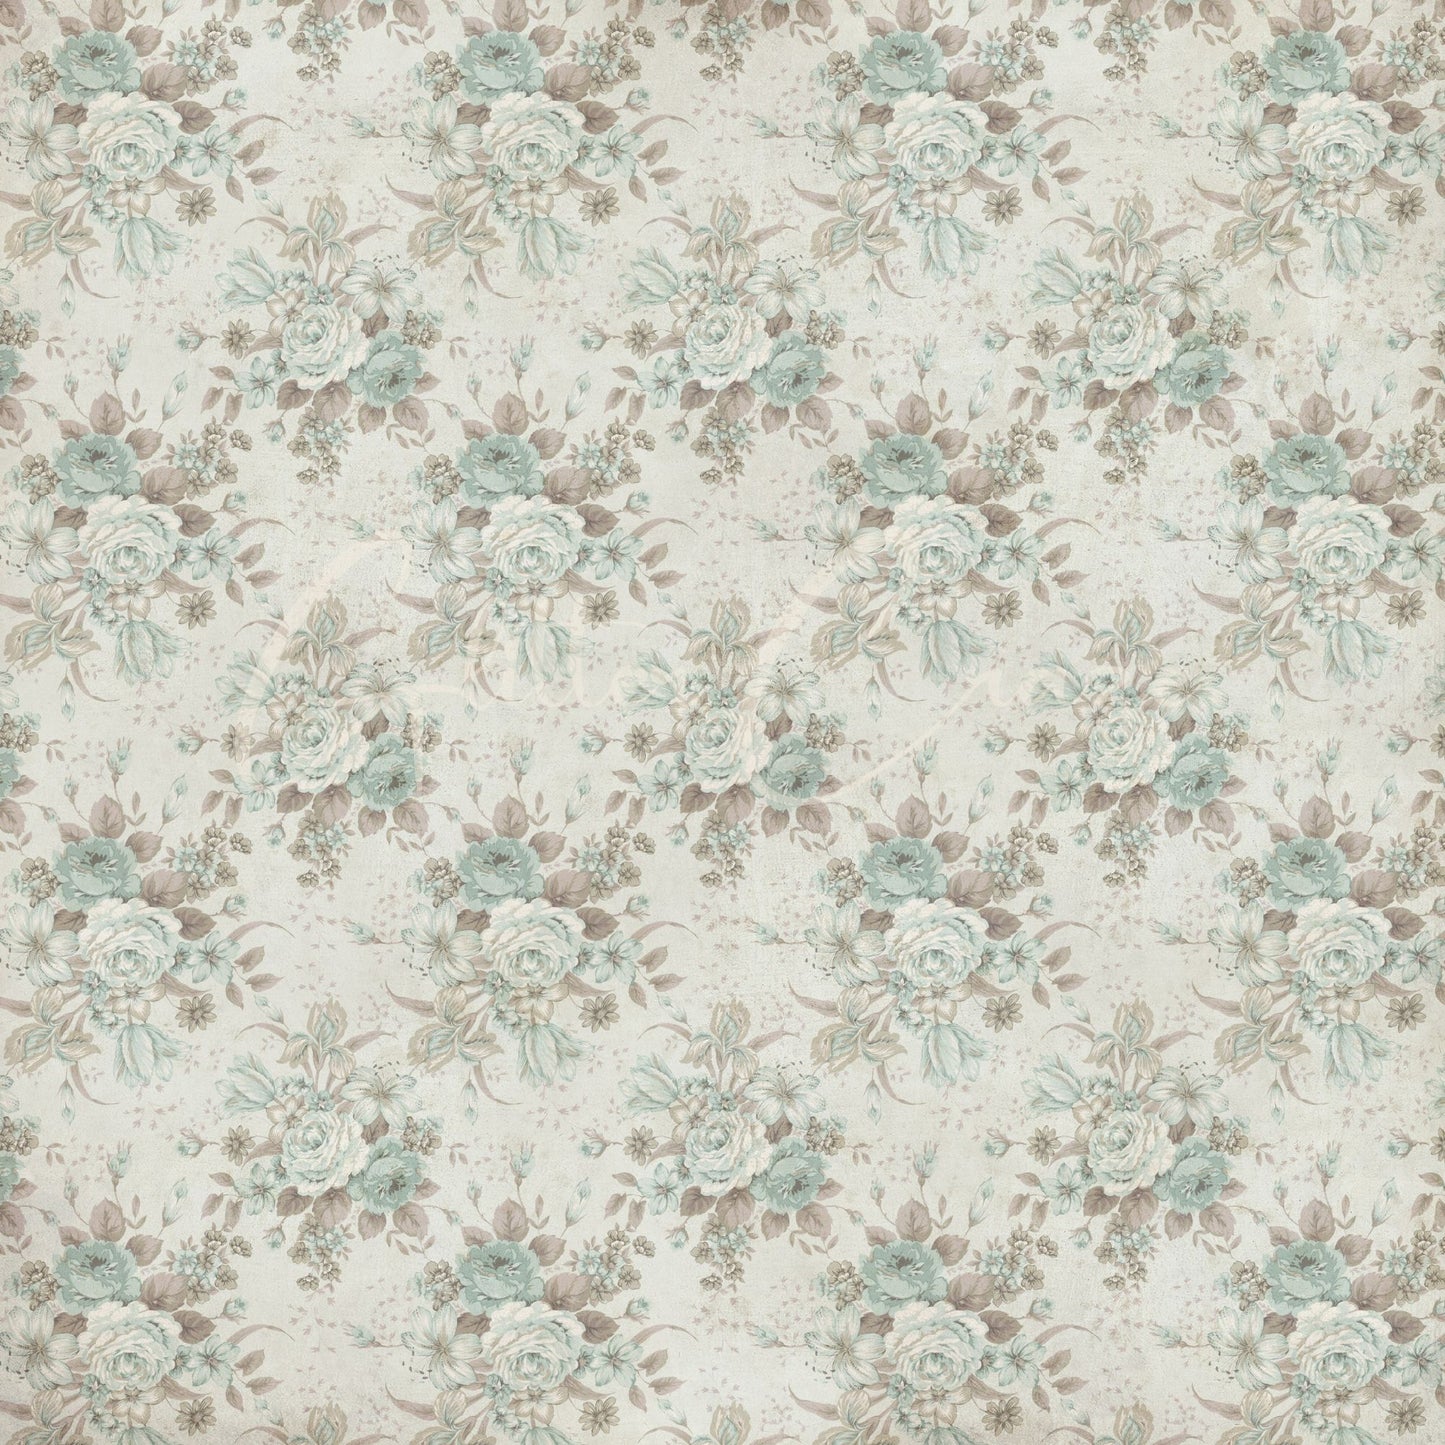 Victorian Floral collection- 12x12 vinyl sheets- 12 designs available